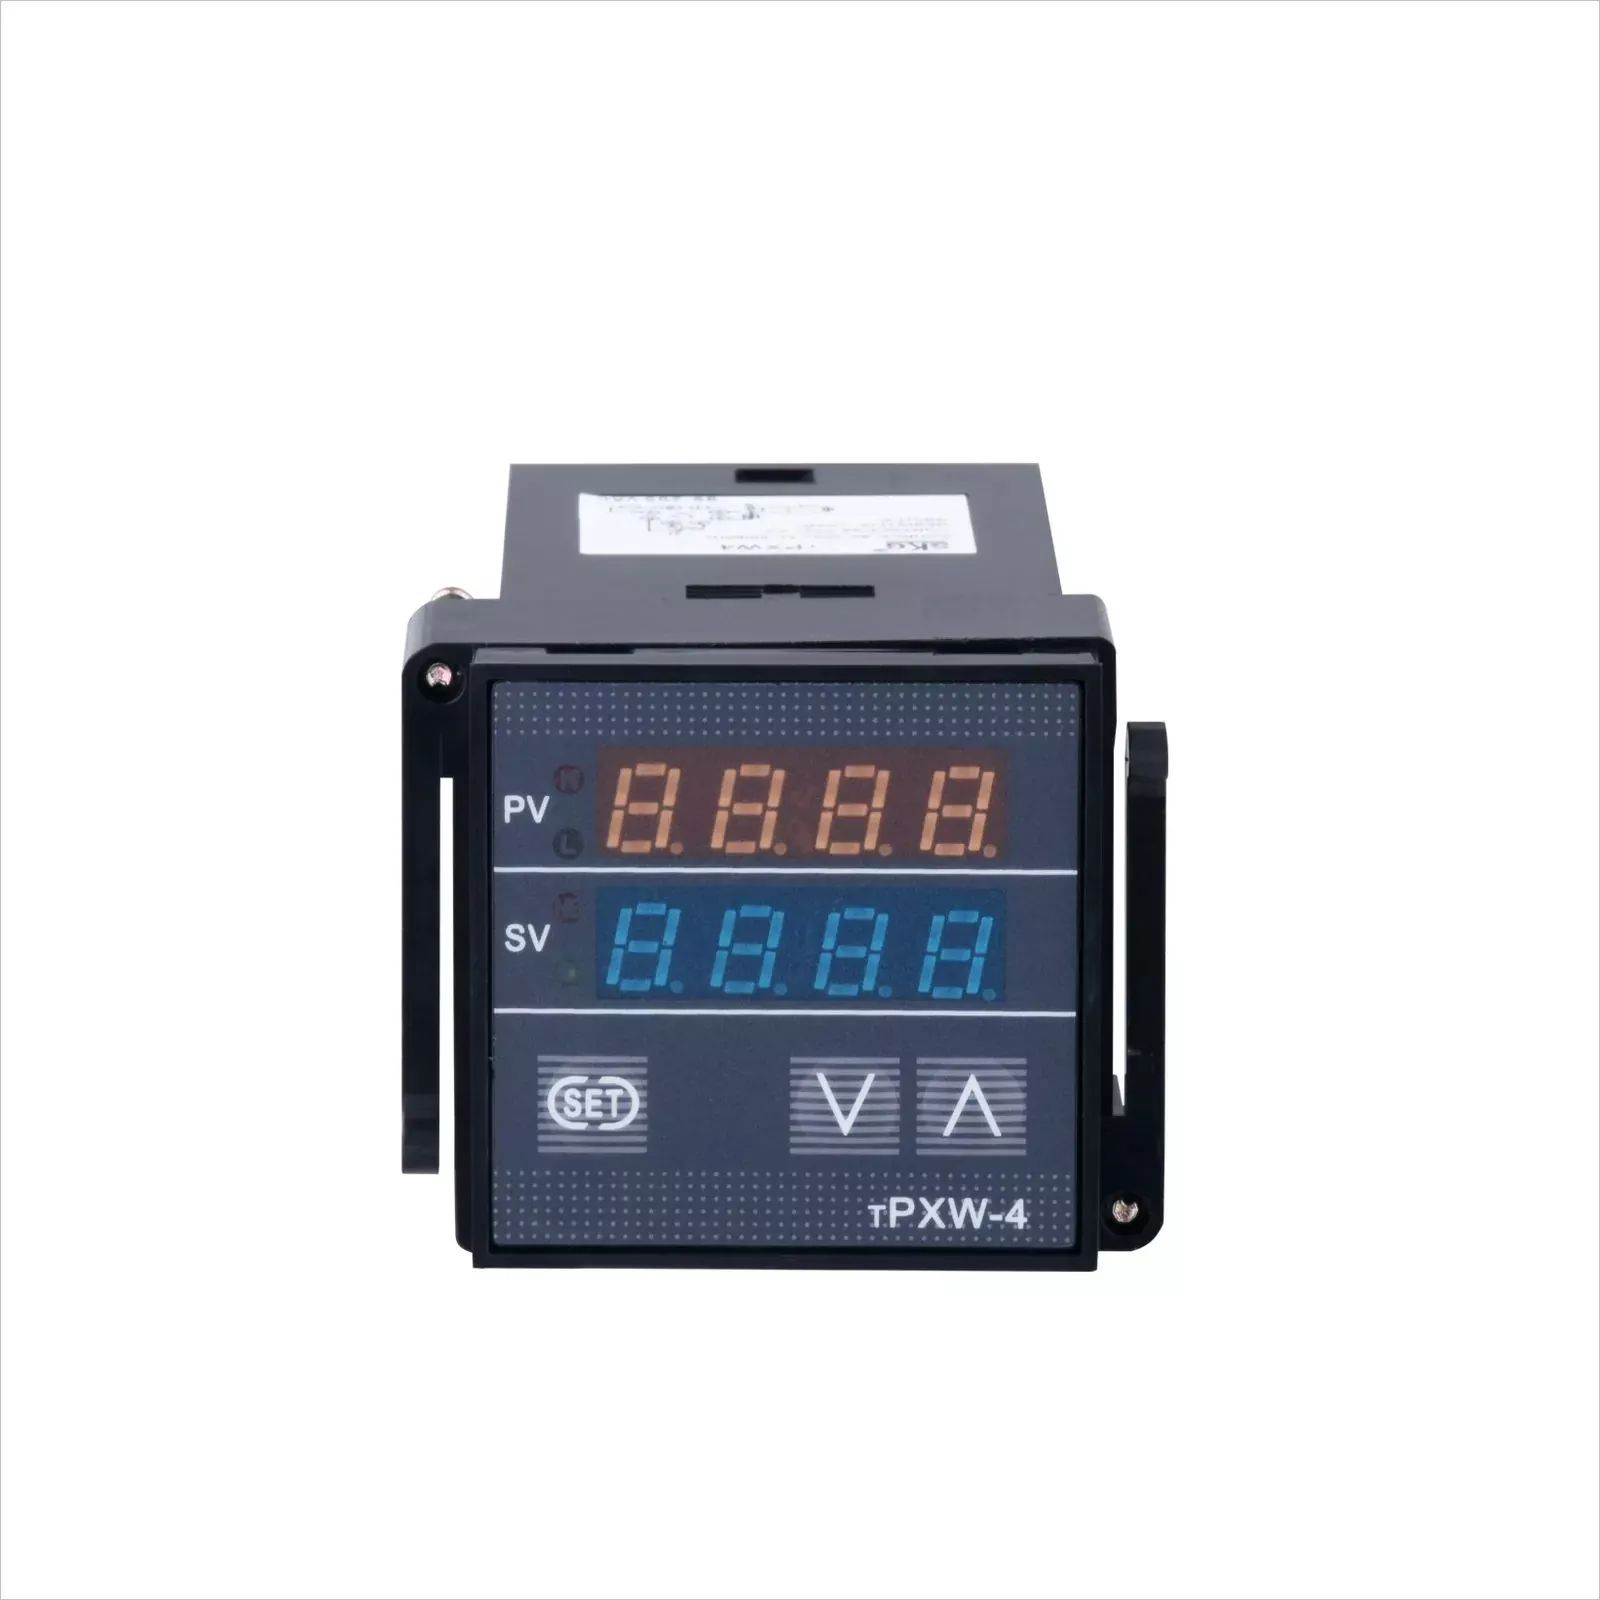 TPXW4 Rail Mounted Intelligent Digital Temperature Controller with 8-pin base/11-pin base